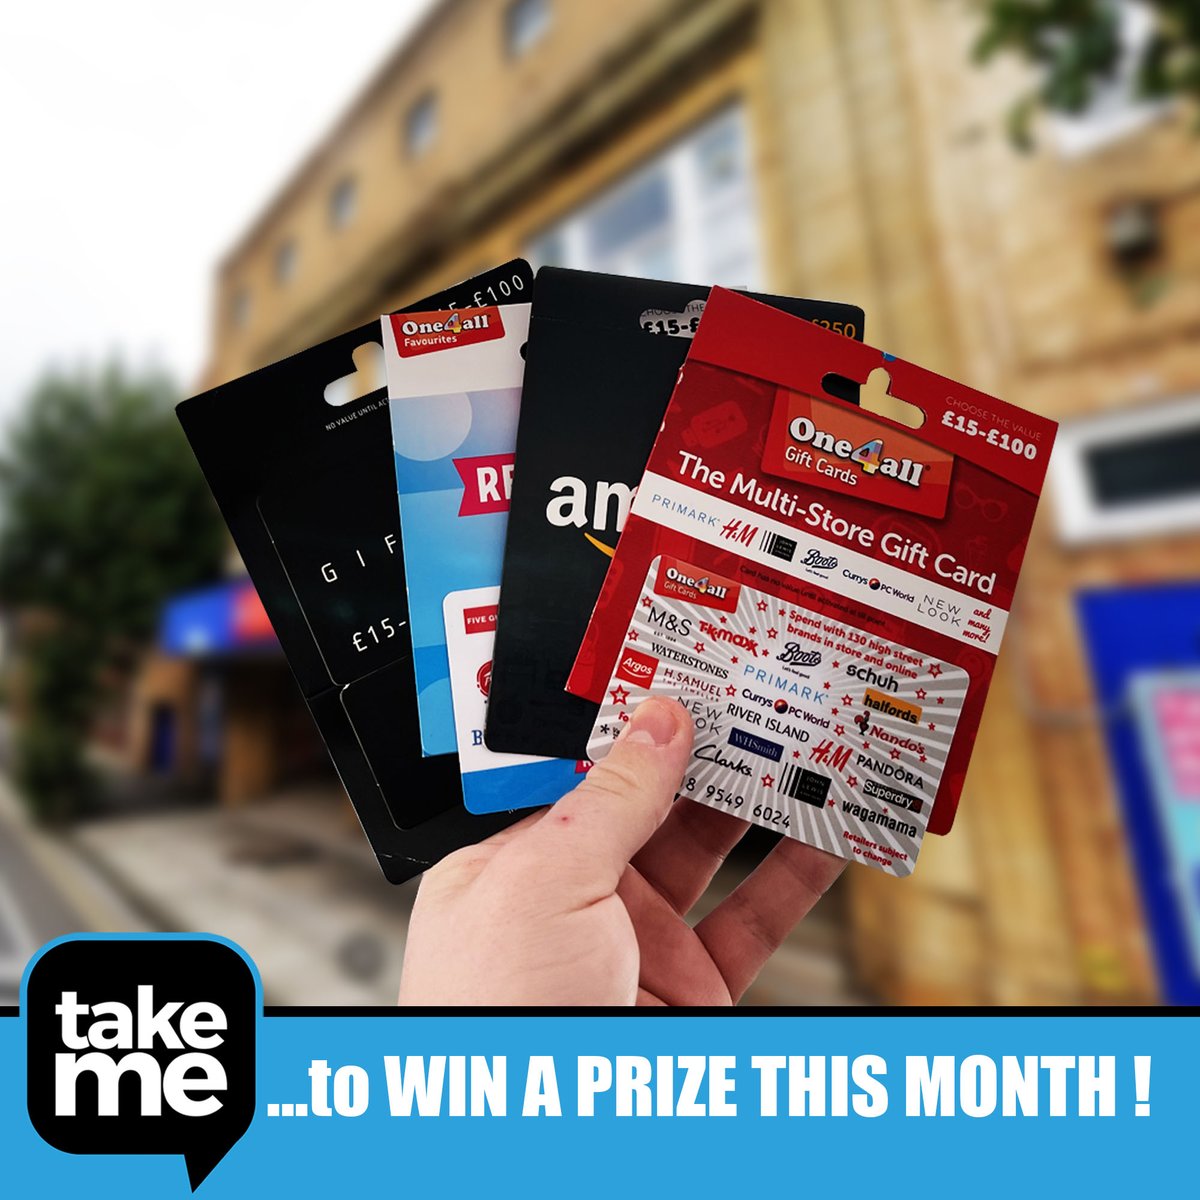 WIN £100 to spend on Amazon, Meal, Cinema vouchers… 1] LIKE & Share this post 2] Comment WHERE you would spend them 3] FOLLOW TAKE ME TAUNTON Winner announced at the end of each month #TakeMe #Taunton #Bridgwater